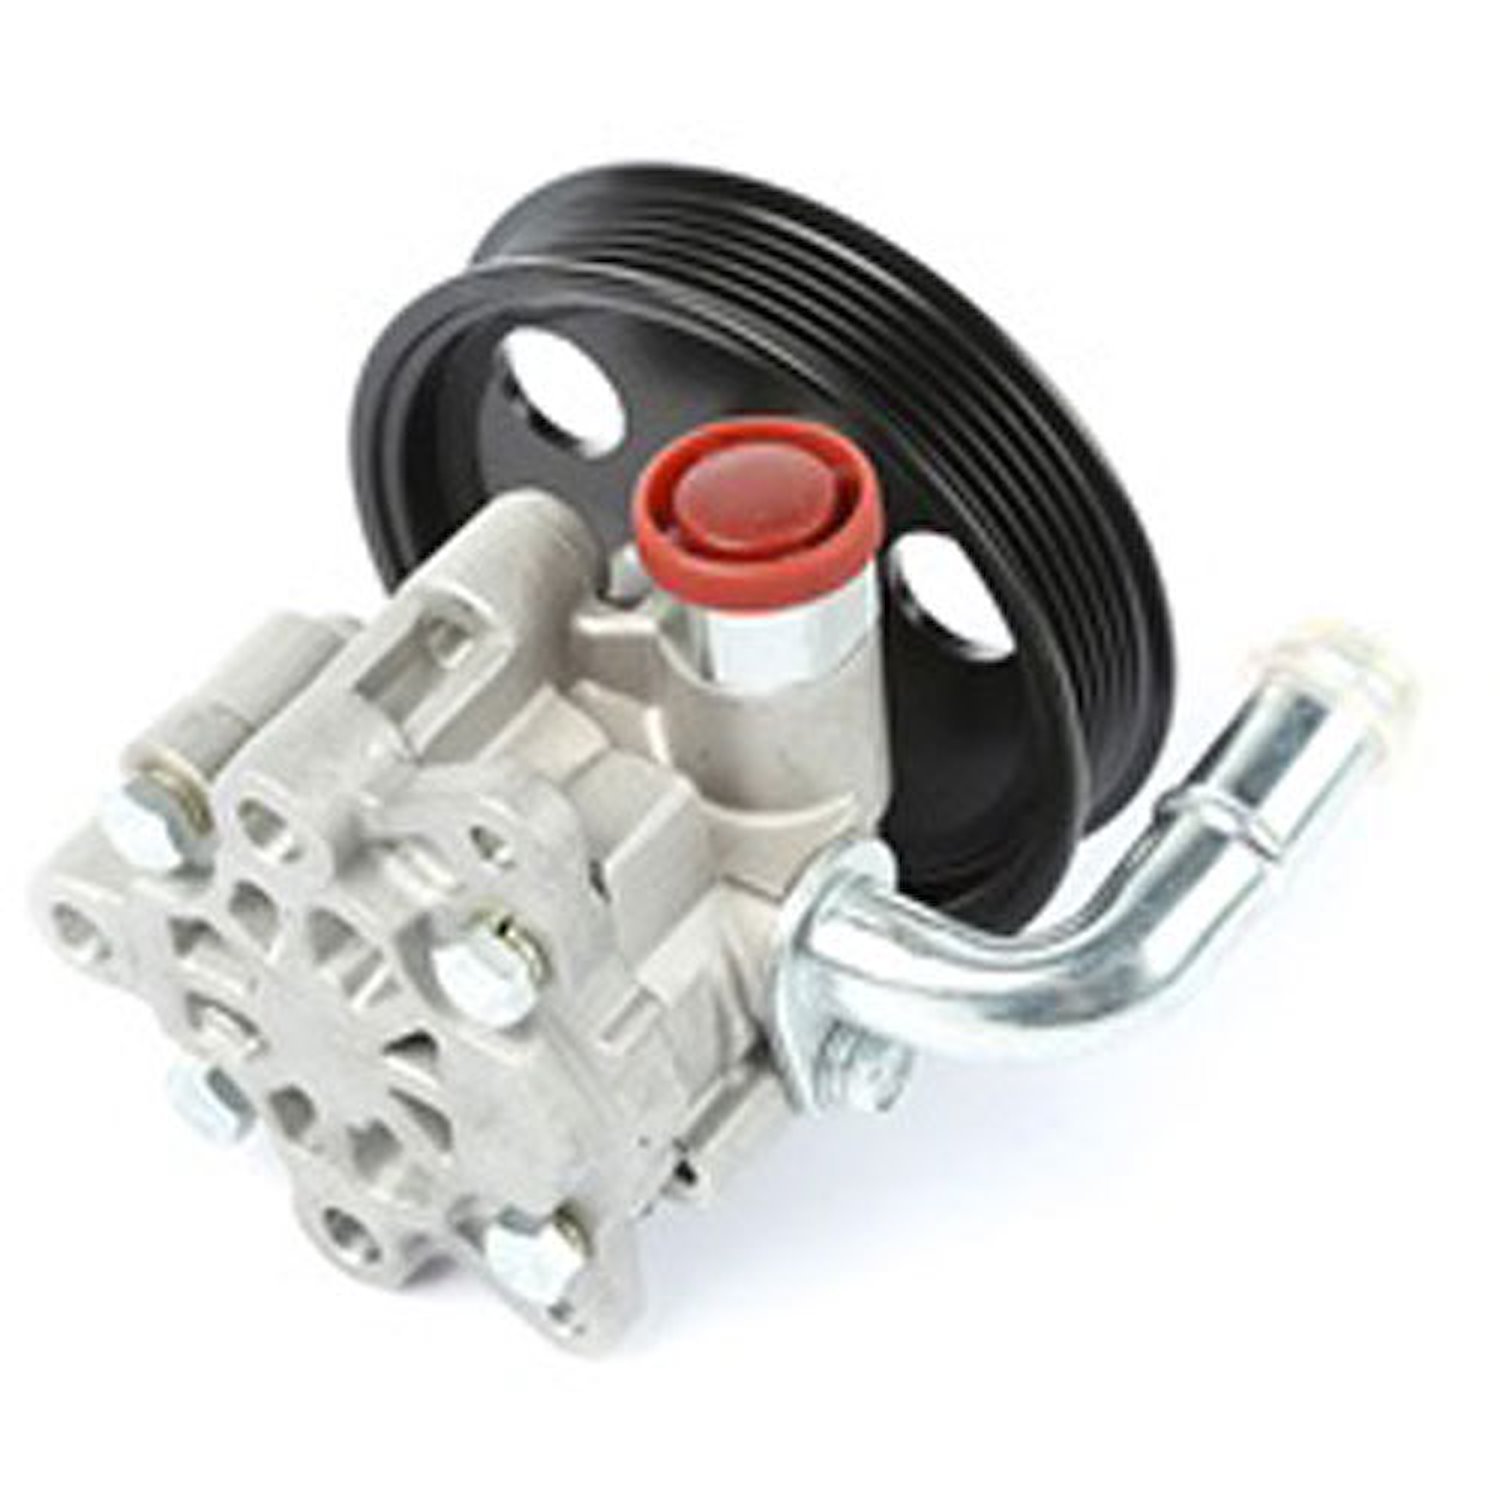 This power steering pump from Omix-ADA fits 05-08 Jeep Grand Cherokees and 06-08 Commanders with a 5.7L engine.